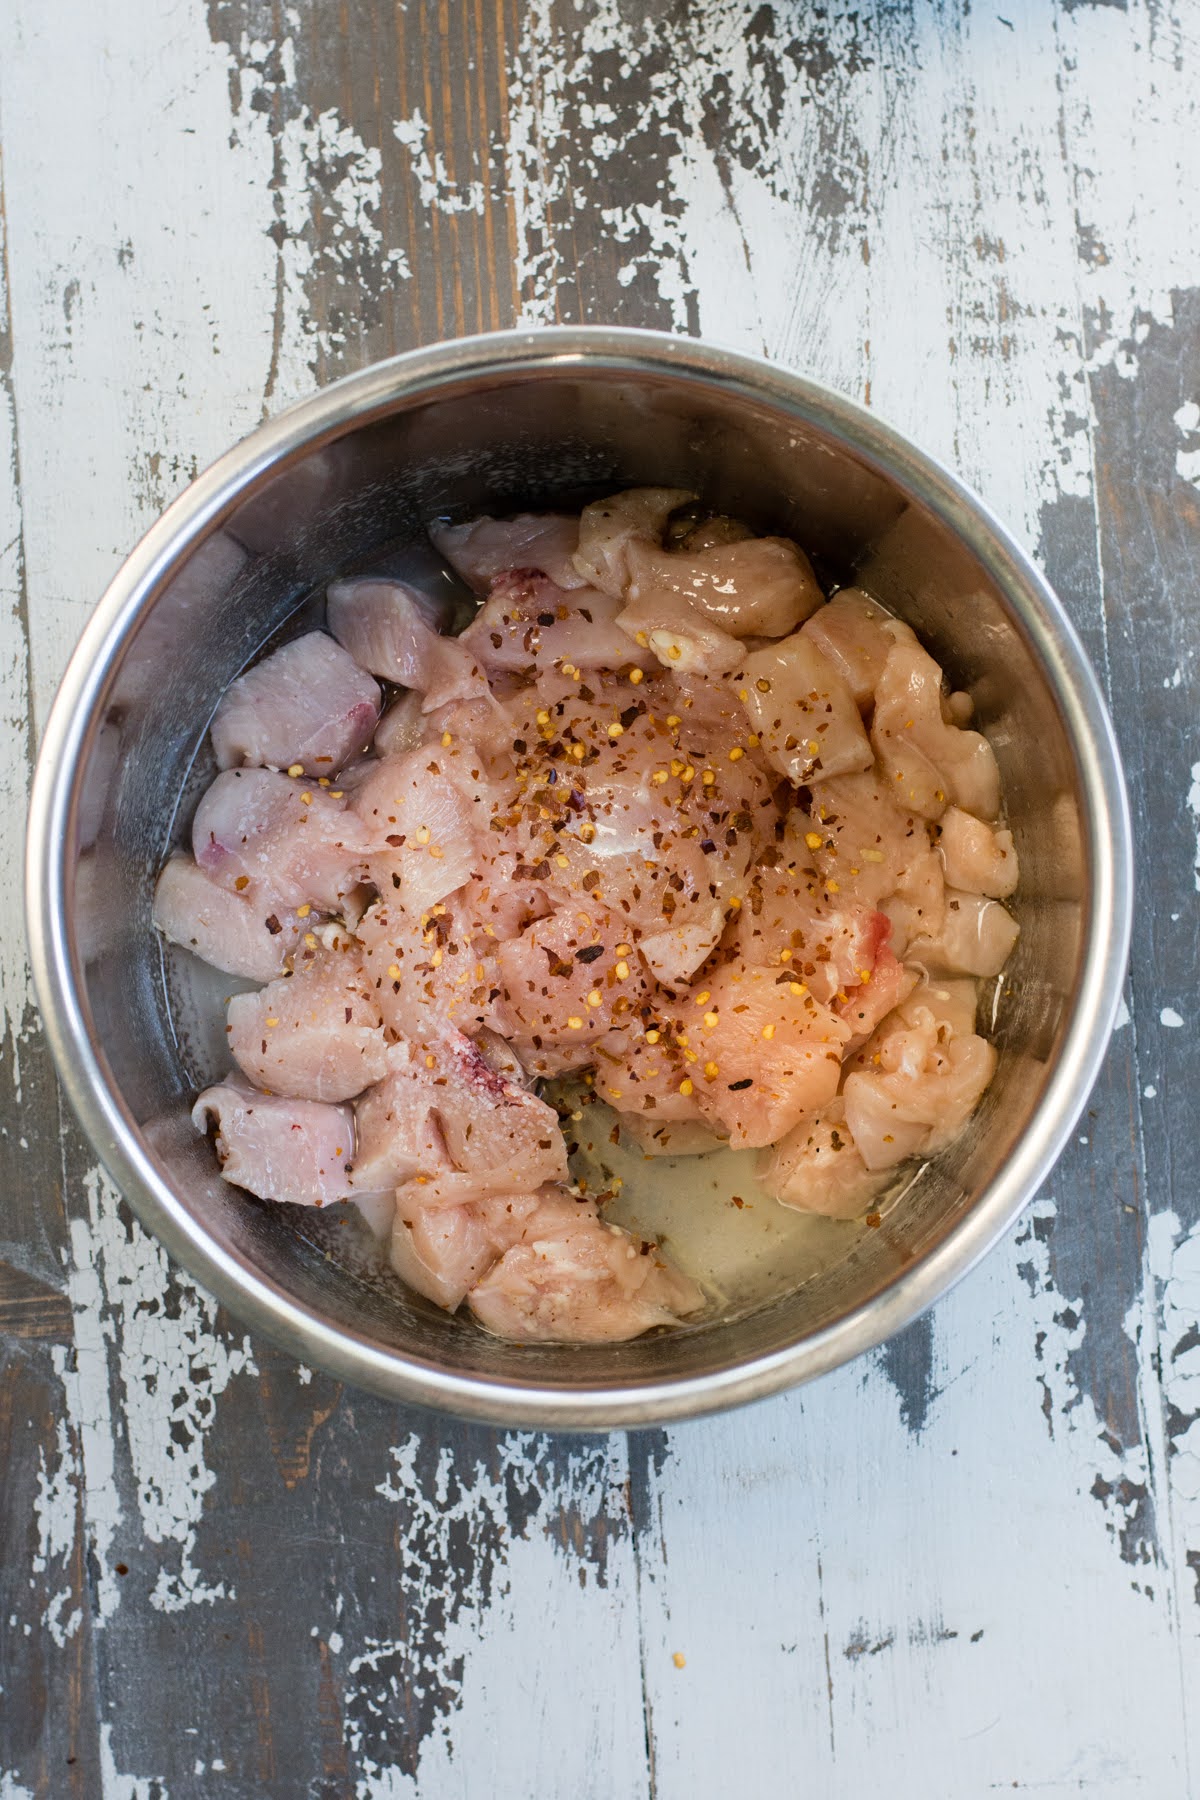 Chicken with salt and pepper in a bowl.